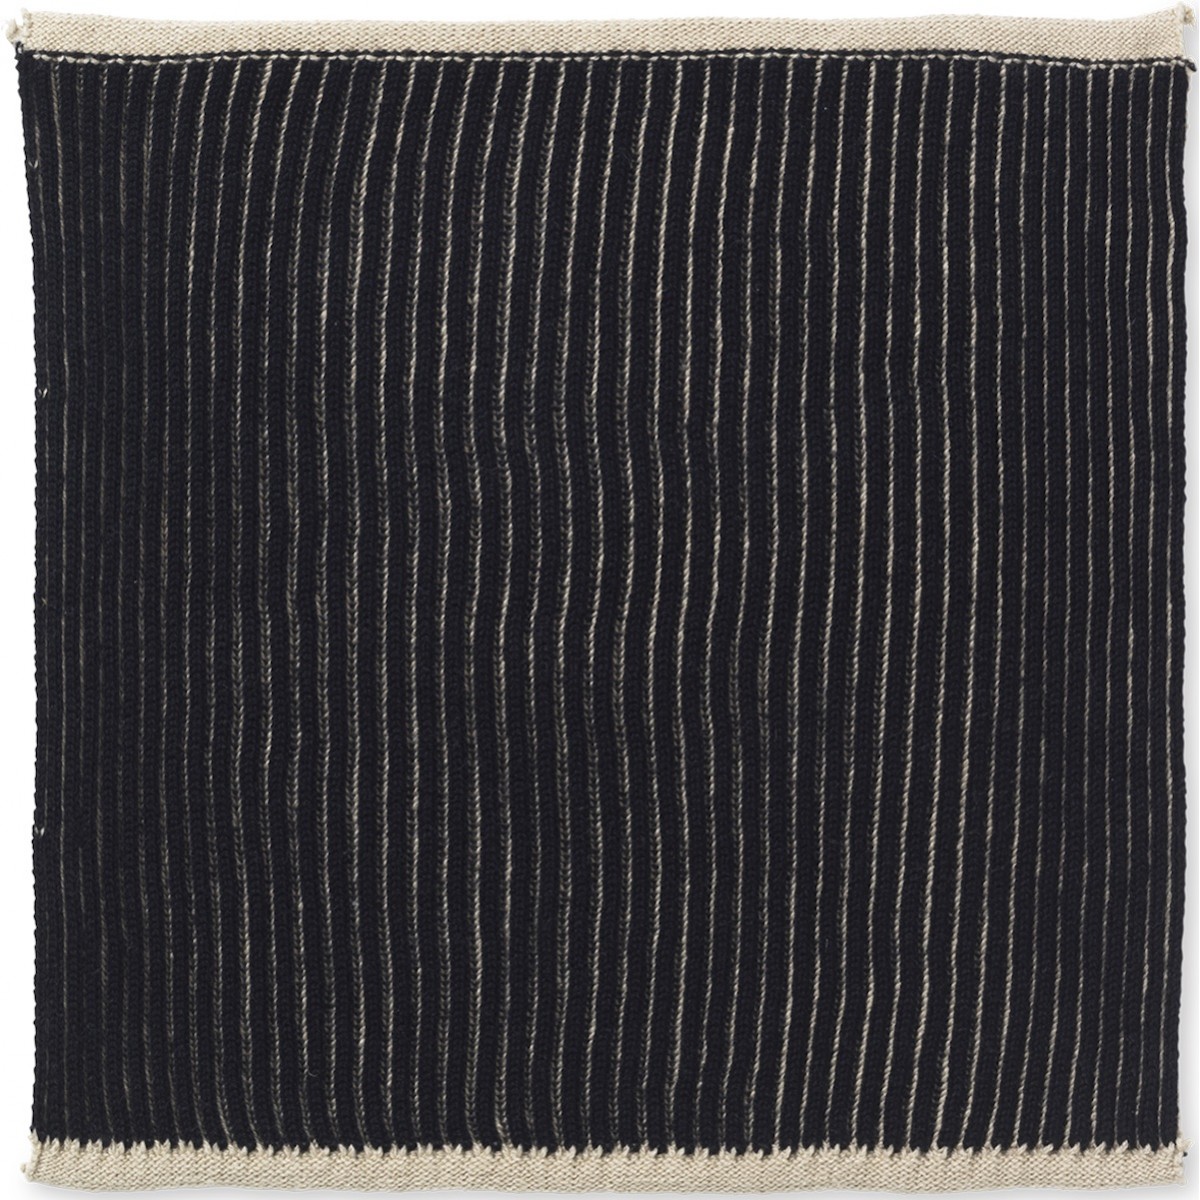 SOLD OUT Twofold dish cloth - sand/black